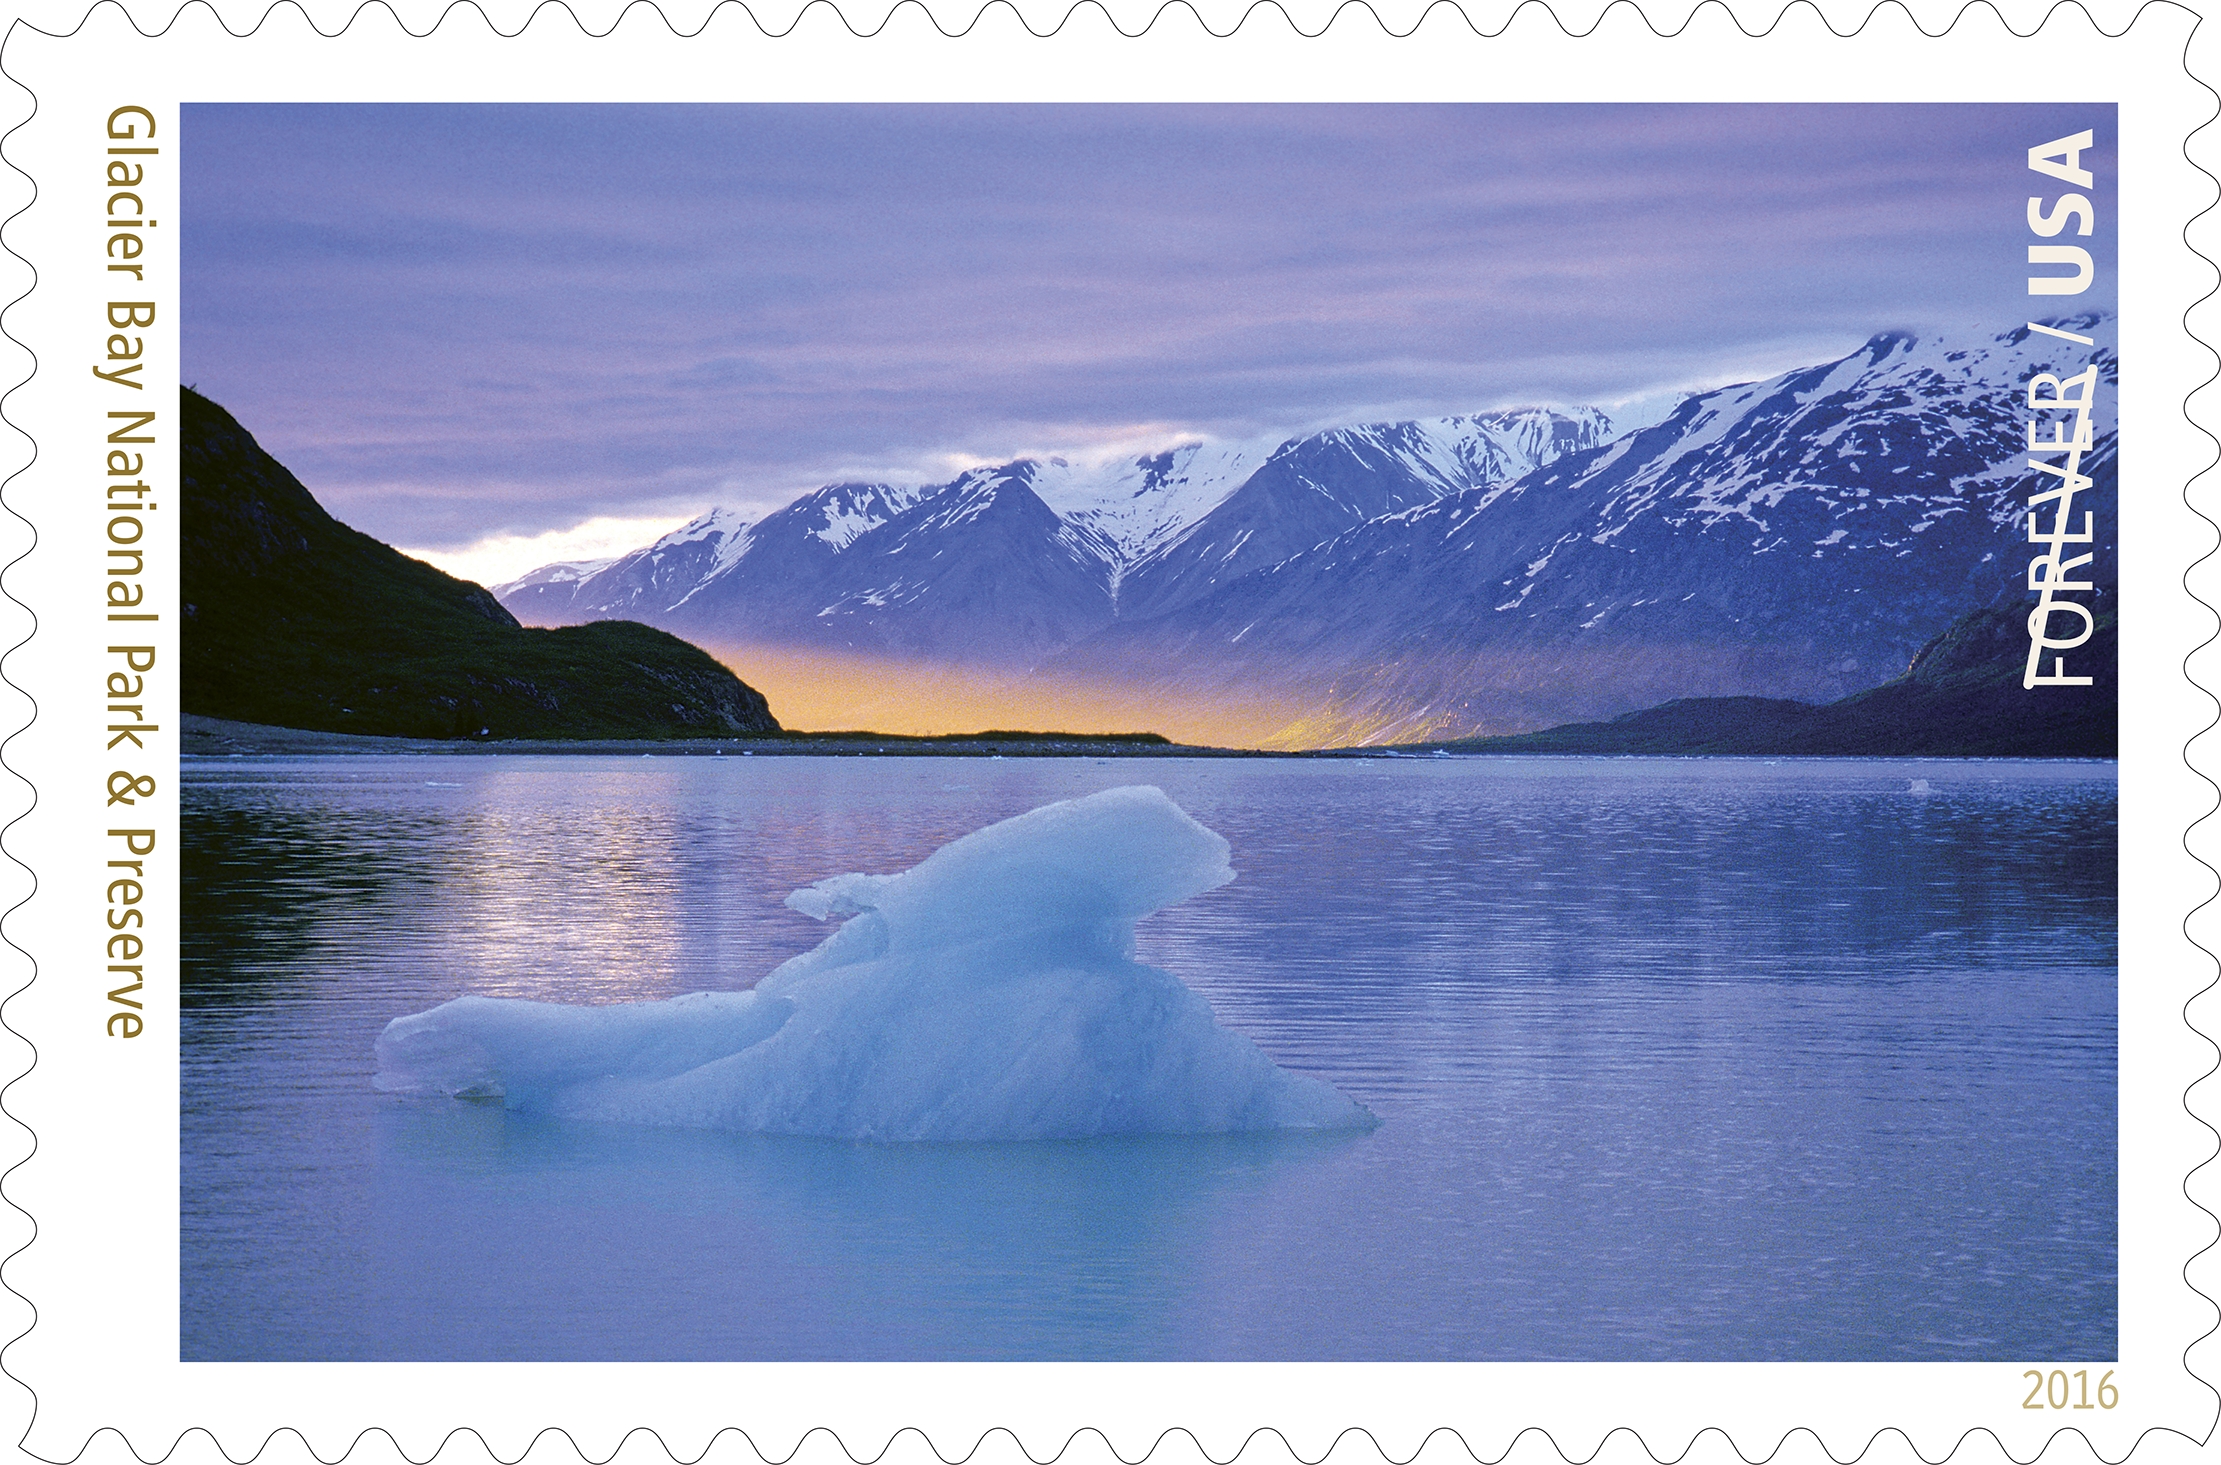 Glacier Bay National Park featured as part of centennial 16